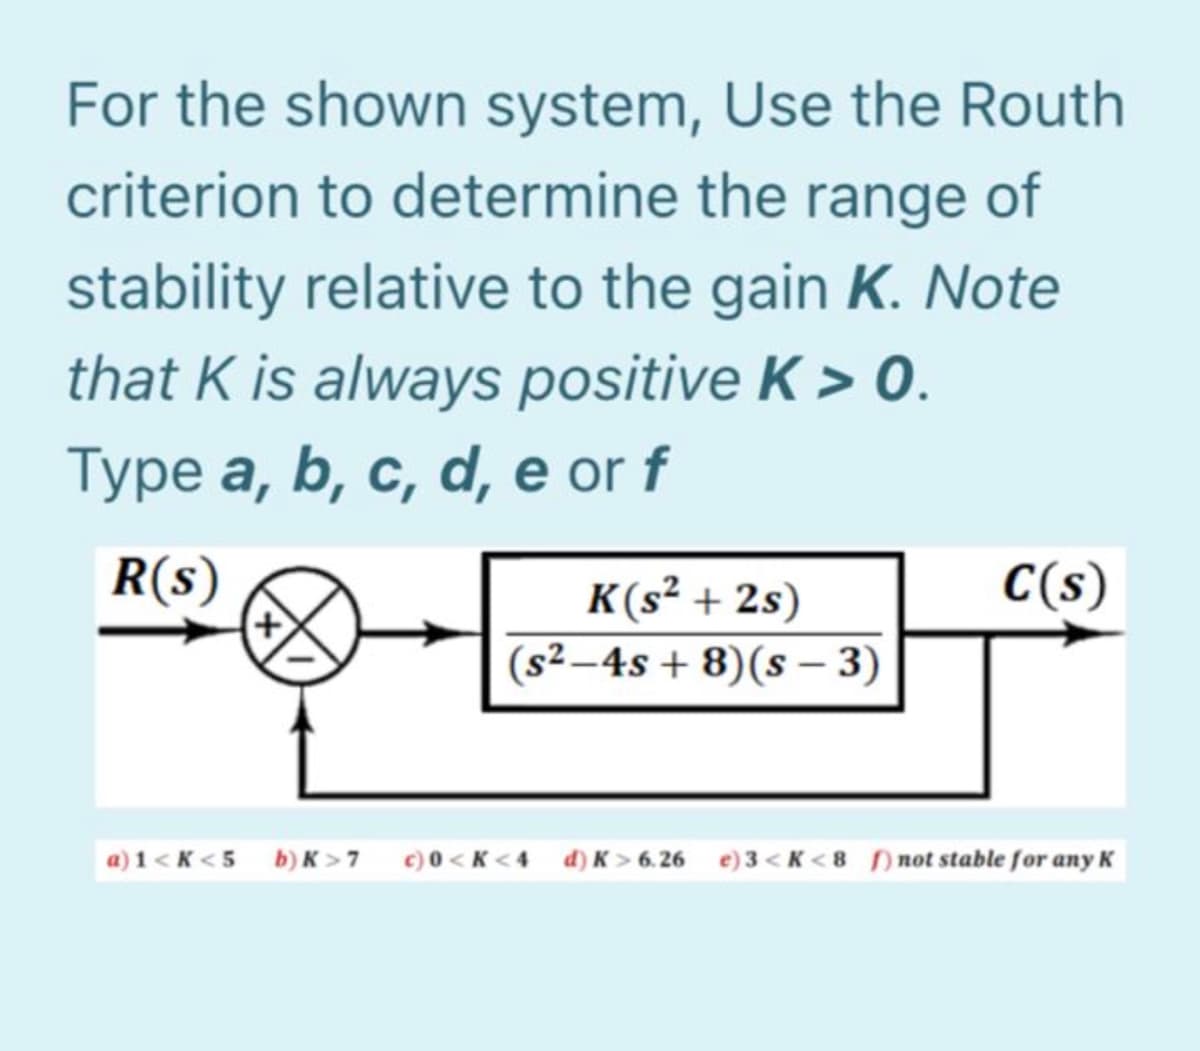 For the shown system, Use the Routh
criterion to determine the range of
stability relative to the gain K. Note
that K is always positive K > 0.
Type a, b, c, d, e or f
R(s)
C(s)
K(s² + 2s)
(s² –4s + 8)(s – 3)
a) 1 < K < 5 b)K >7 ¢)0<K<4 d) K > 6.26 e)3 < K < 8 not stable for any K
